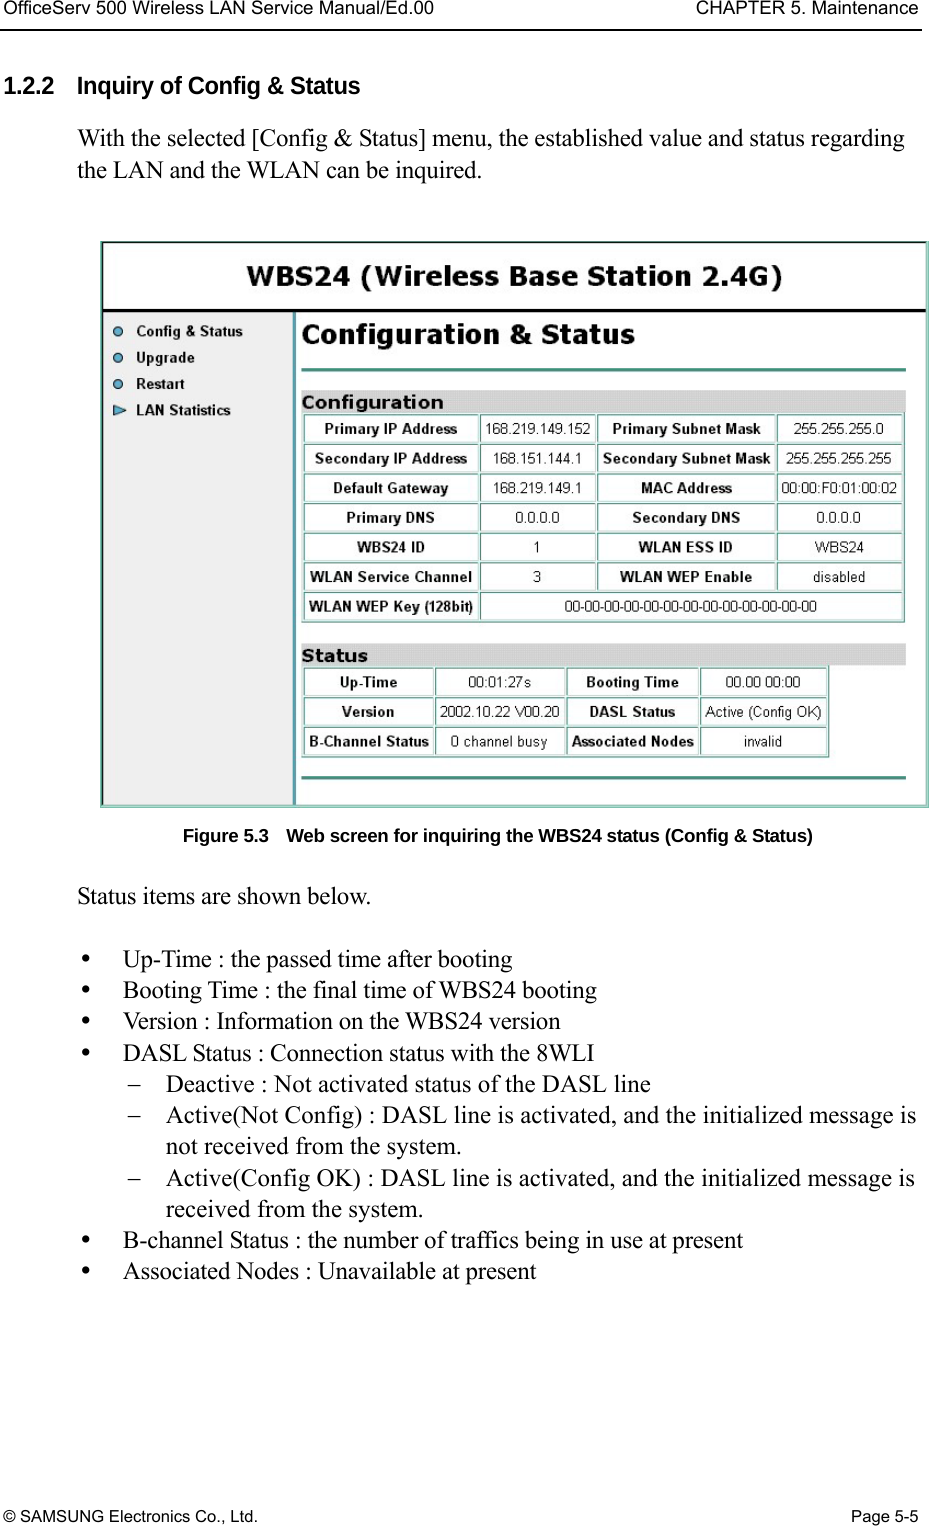 OfficeServ 500 Wireless LAN Service Manual/Ed.00  CHAPTER 5. Maintenance © SAMSUNG Electronics Co., Ltd.  Page 5-5 1.2.2  Inquiry of Config &amp; Status   With the selected [Config &amp; Status] menu, the established value and status regarding the LAN and the WLAN can be inquired.      Figure 5.3    Web screen for inquiring the WBS24 status (Config &amp; Status)  Status items are shown below.    Up-Time : the passed time after booting     Booting Time : the final time of WBS24 booting   Version : Information on the WBS24 version   DASL Status : Connection status with the 8WLI −  Deactive : Not activated status of the DASL line −  Active(Not Config) : DASL line is activated, and the initialized message is not received from the system. −  Active(Config OK) : DASL line is activated, and the initialized message is received from the system.   B-channel Status : the number of traffics being in use at present   Associated Nodes : Unavailable at present 